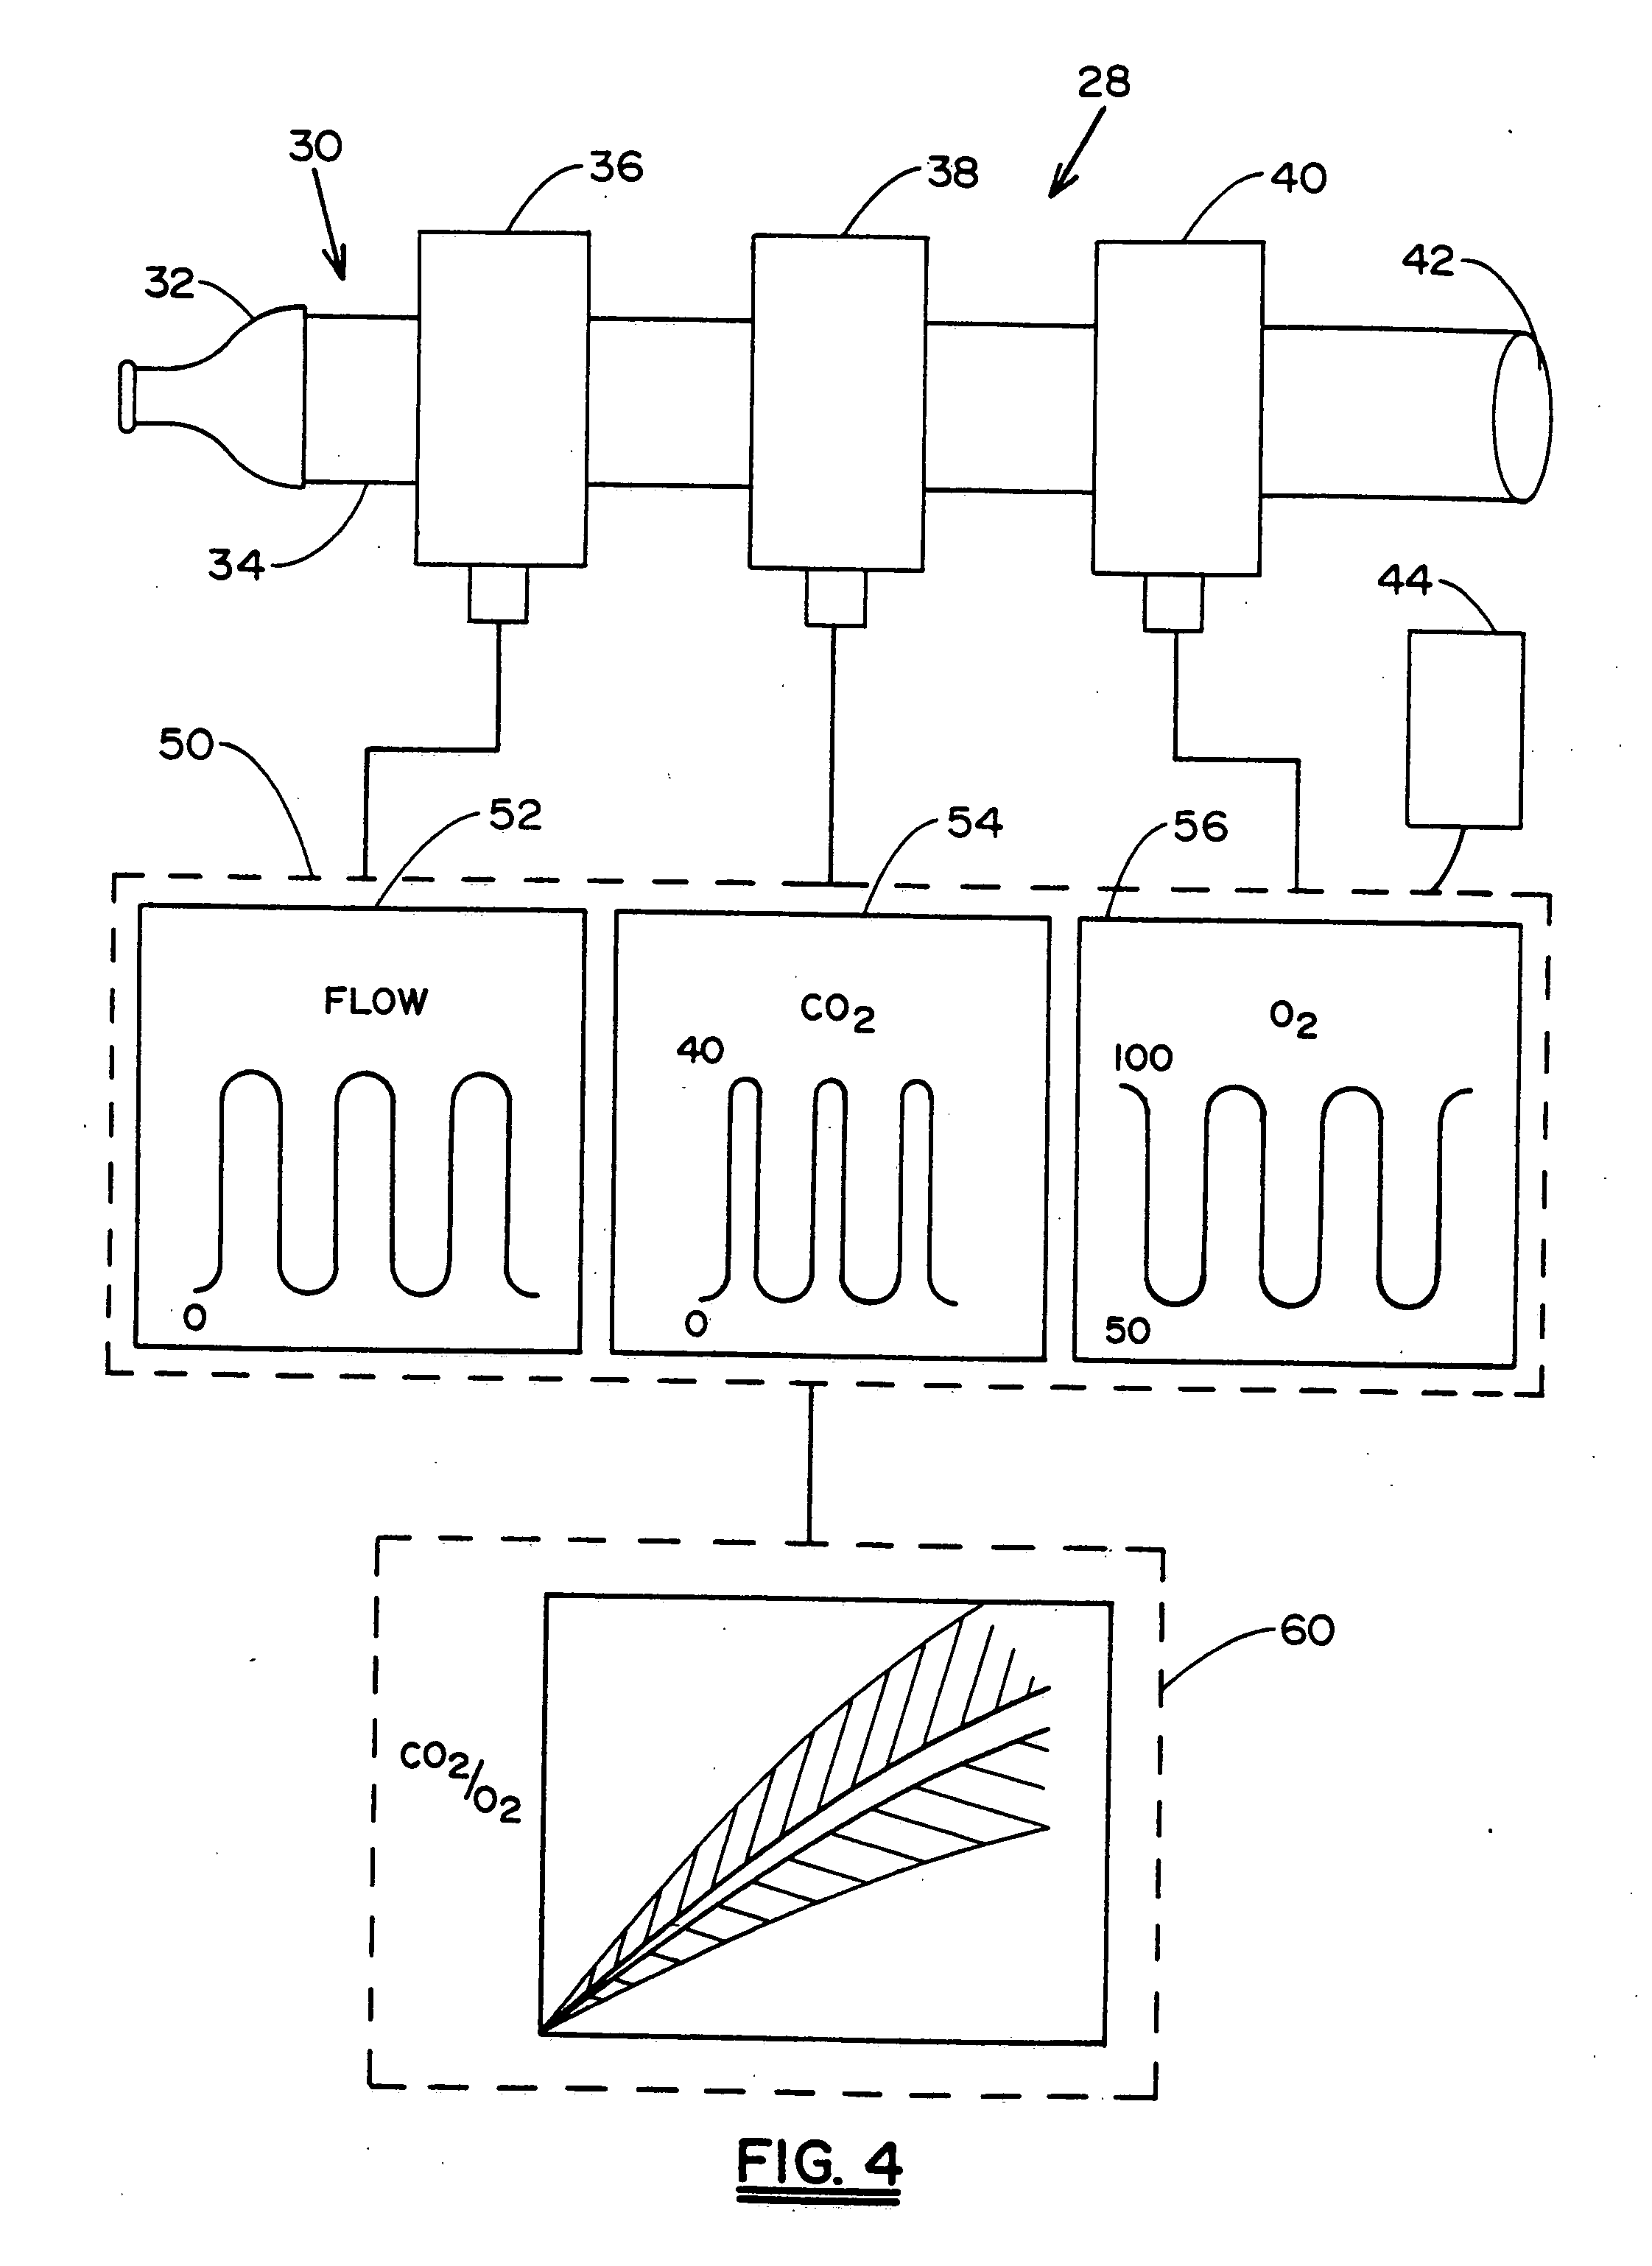 Non-invasive device and method for the diagnosis of pulmonary vascular occlusions